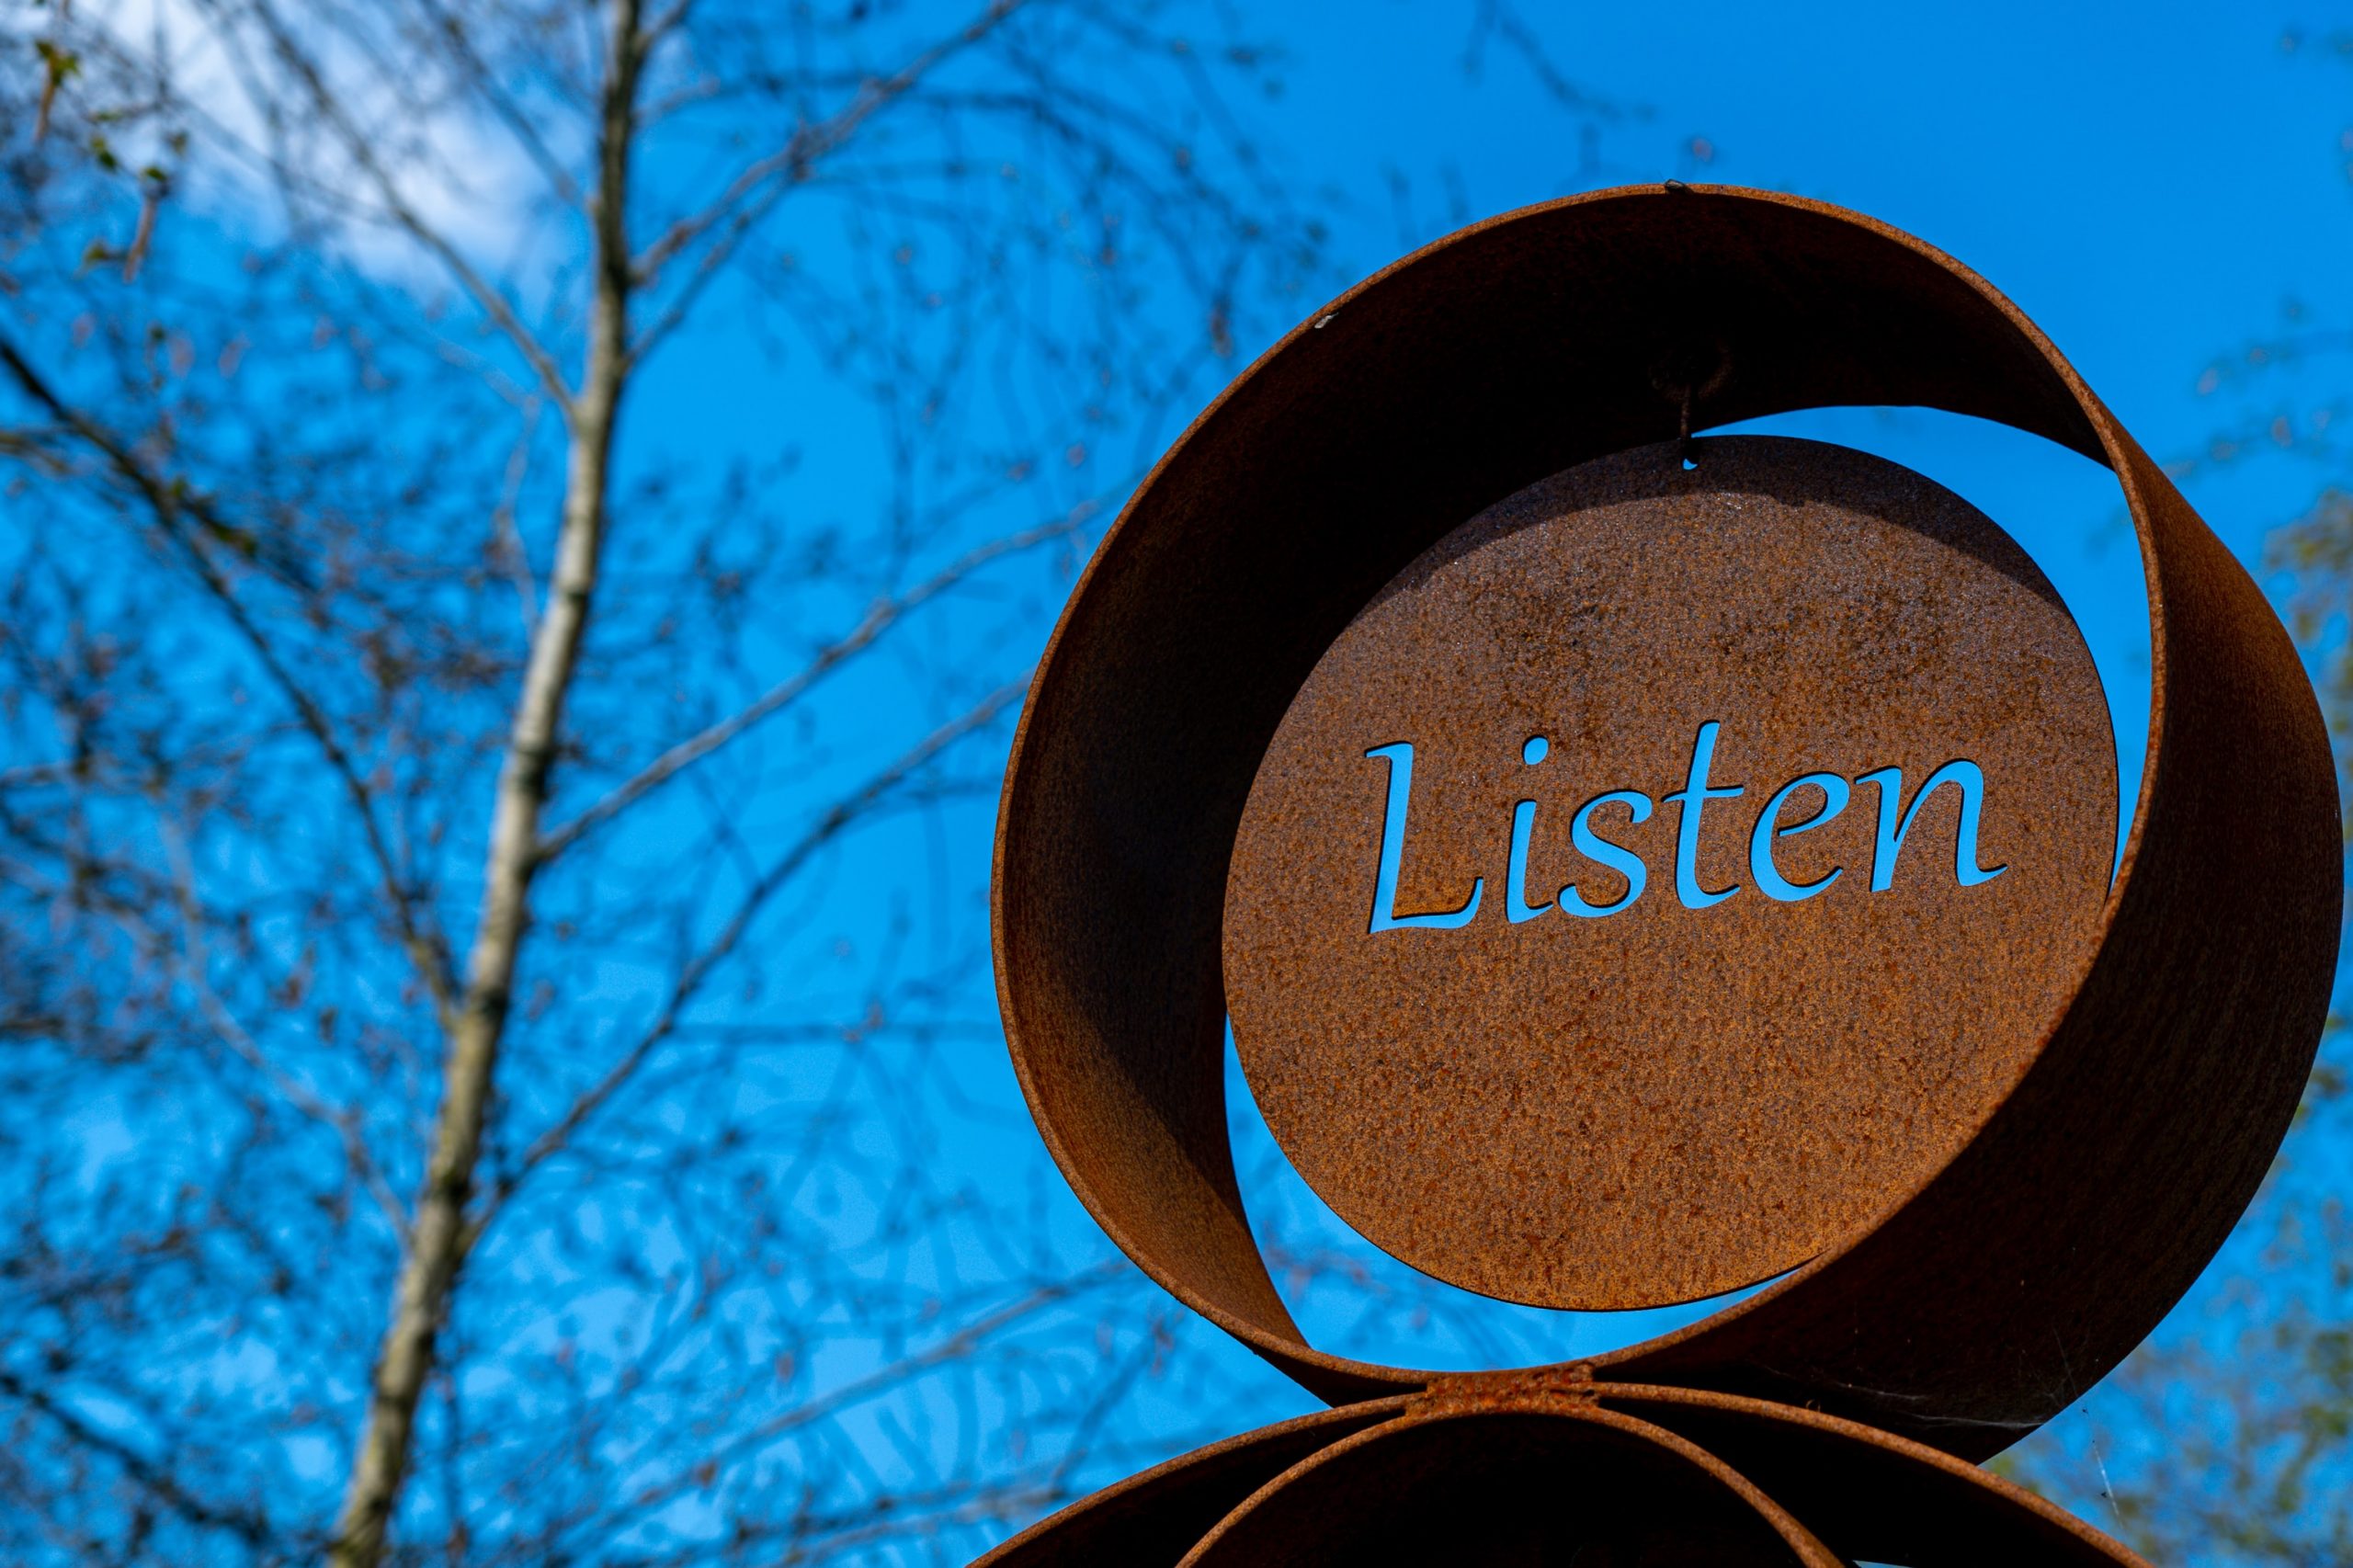 an outdoor sign showing the word listen